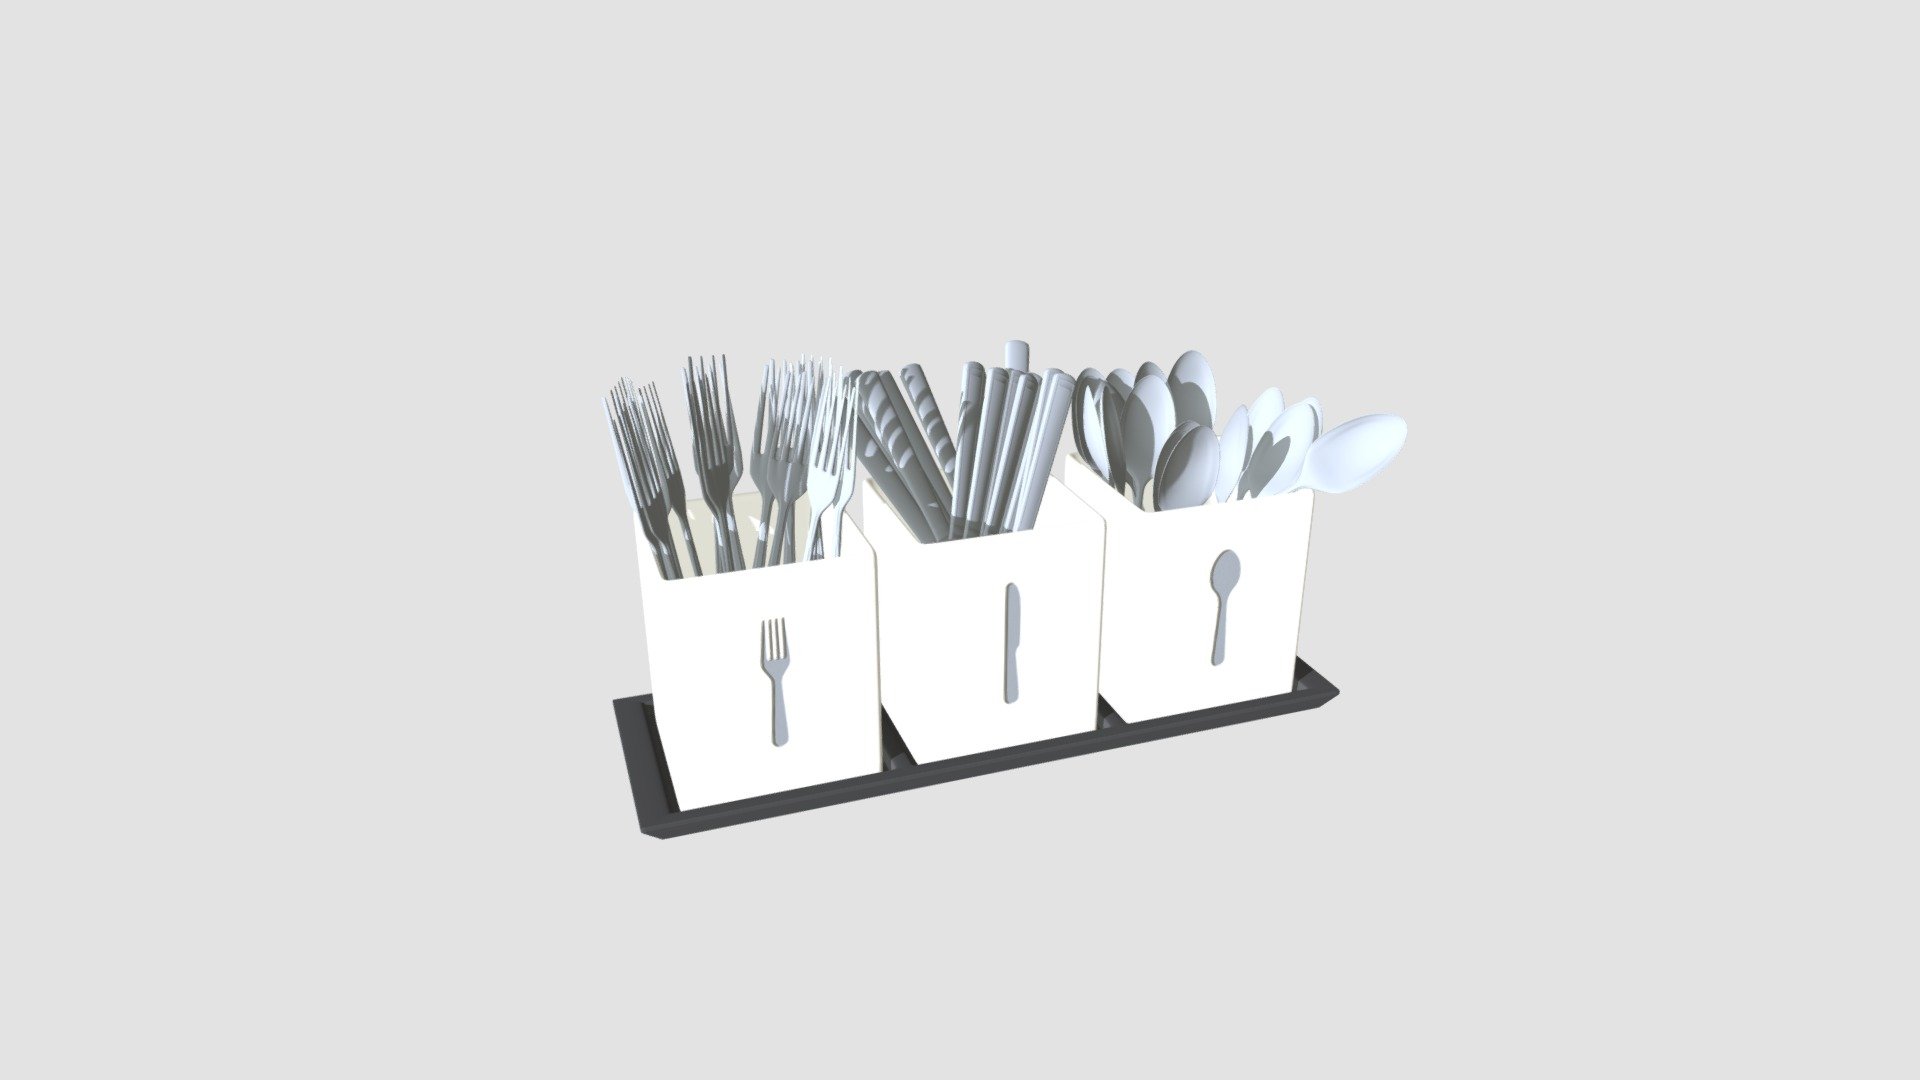 Highly detailed 3d model of cutlery box with all textures, shaders and materials. It is ready to use, just put it into your scene 3d model